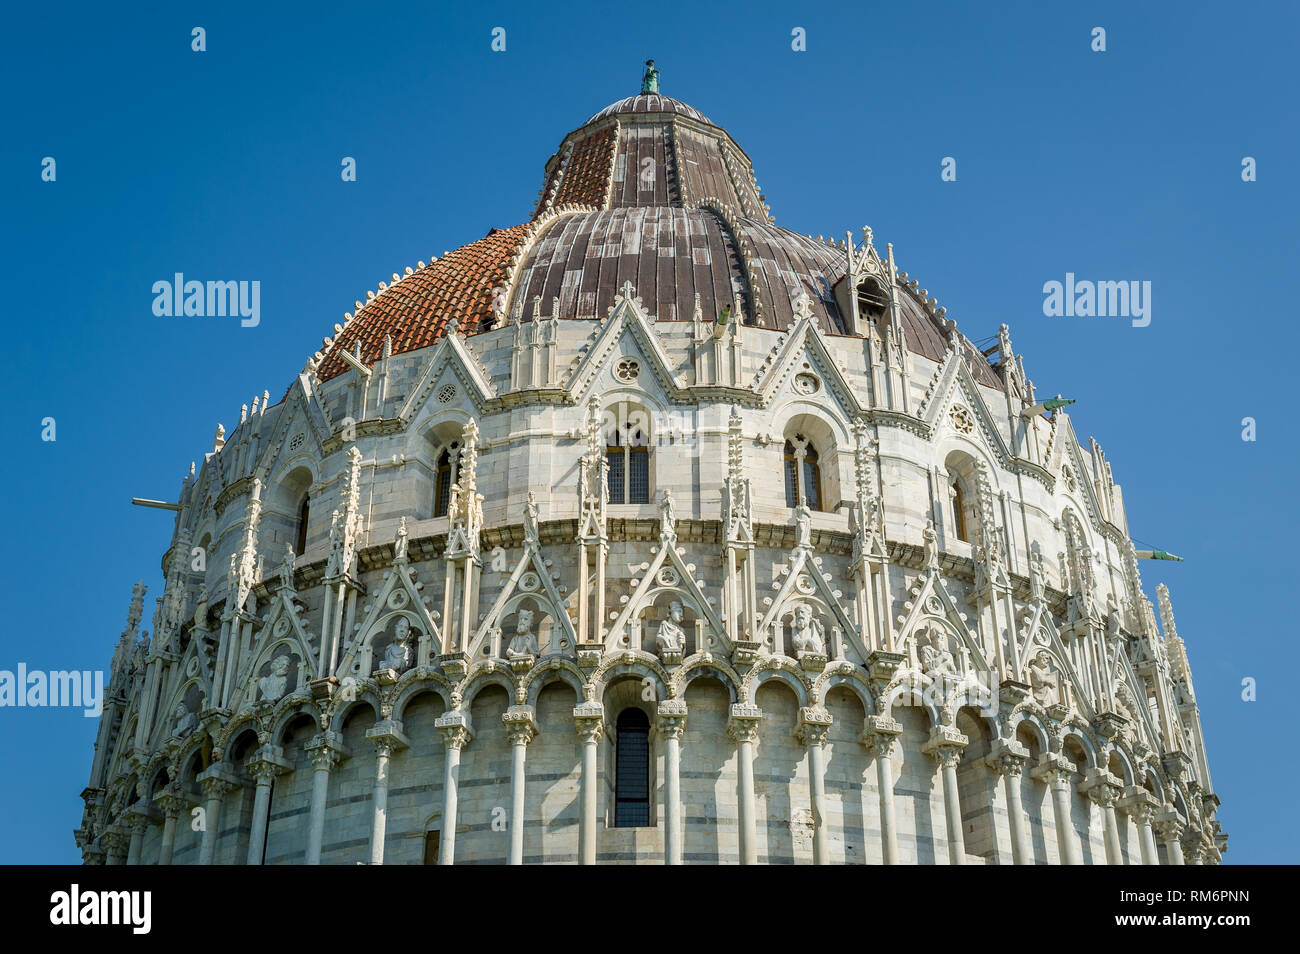 Pisa Baptistery historic tower upper sections close view. Toscana region, Italy Stock Photo